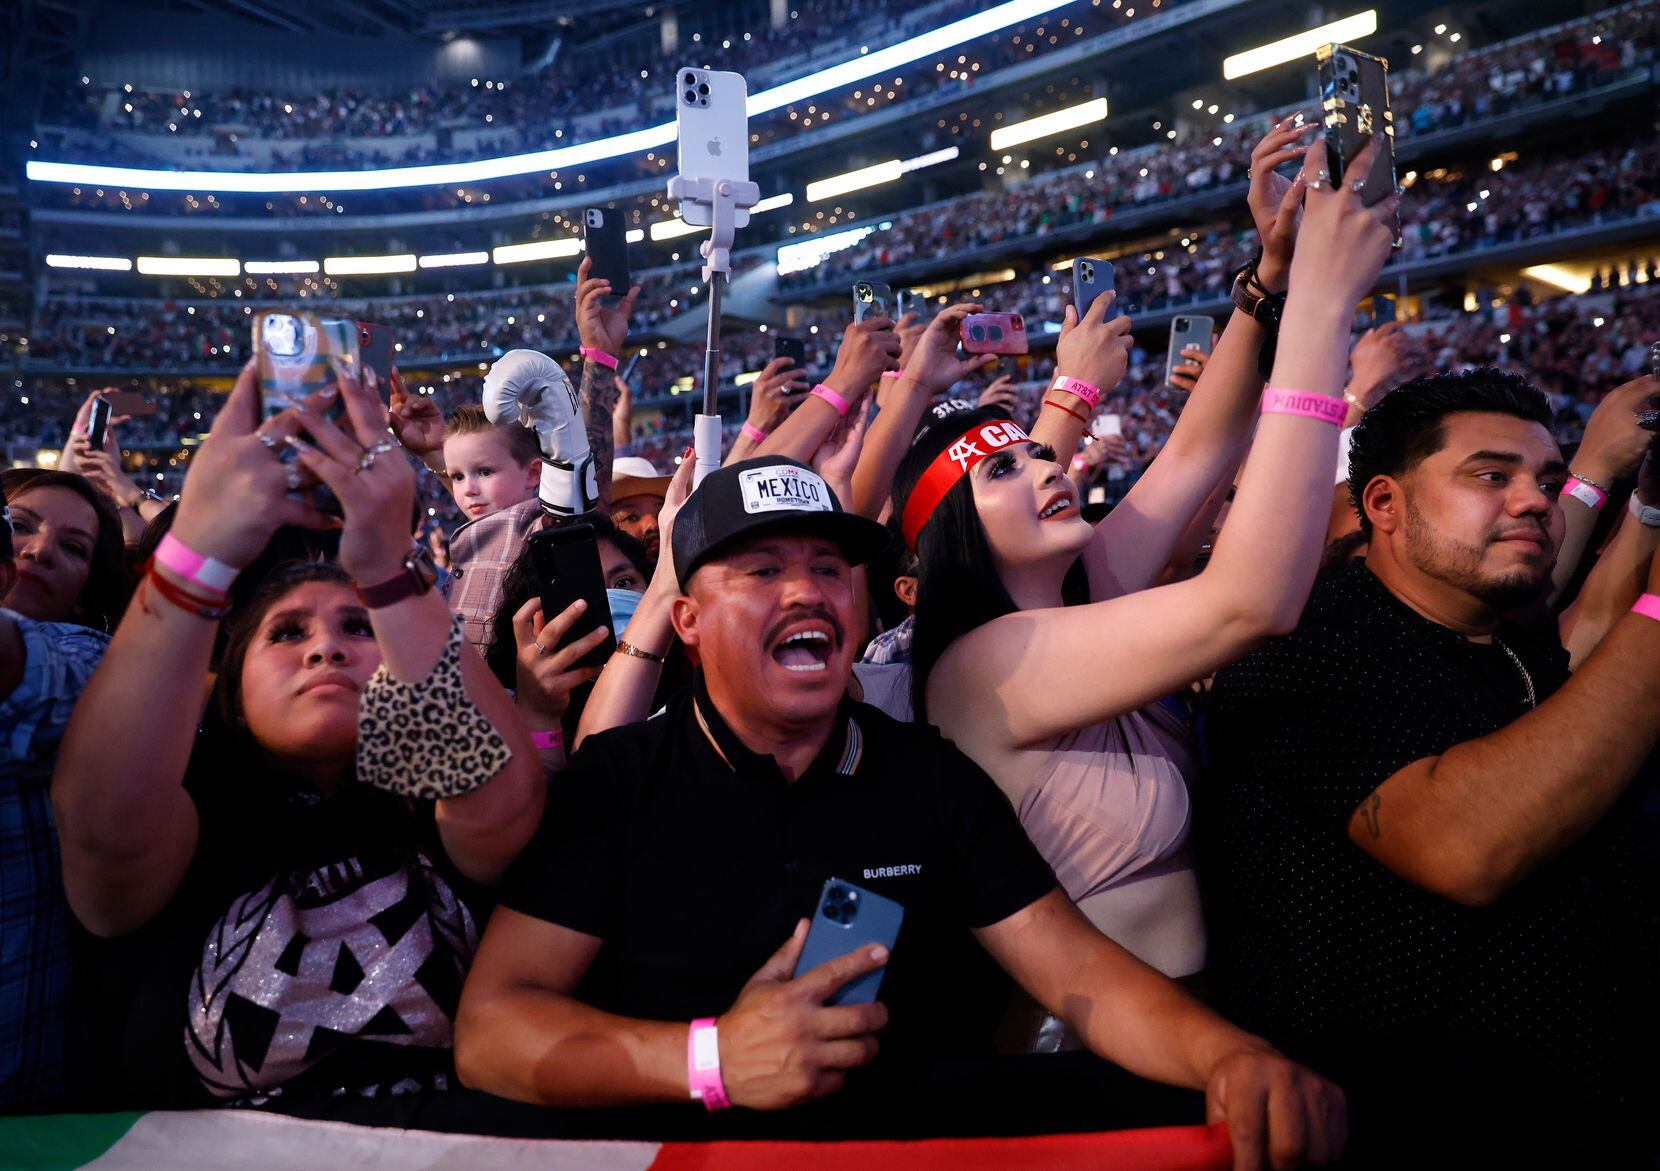 Over 73,000 people, an all-time attendance record for an indoor boxing event in the U.S., filled AT&T stadium to see Mexican boxer Canelo Alvarez defeat British boxer Billy Joe Saunders in their world title fight on May 8.